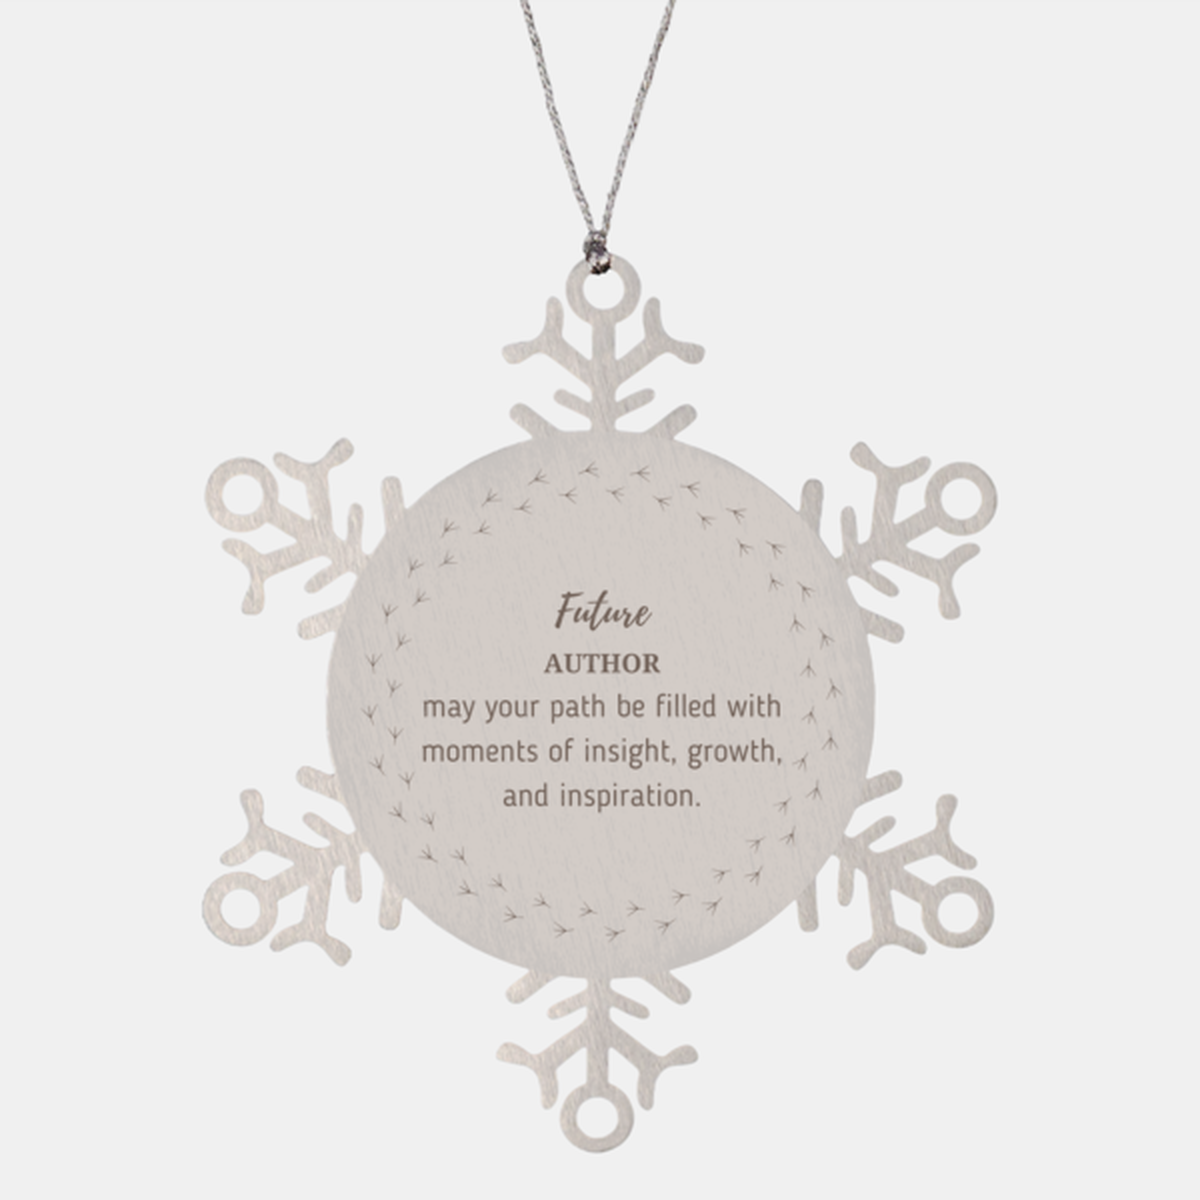 Future Author Gifts, May your path be filled with moments of insight, Graduation Gifts for New Author, Christmas Unique Snowflake Ornament For Men, Women, Friends